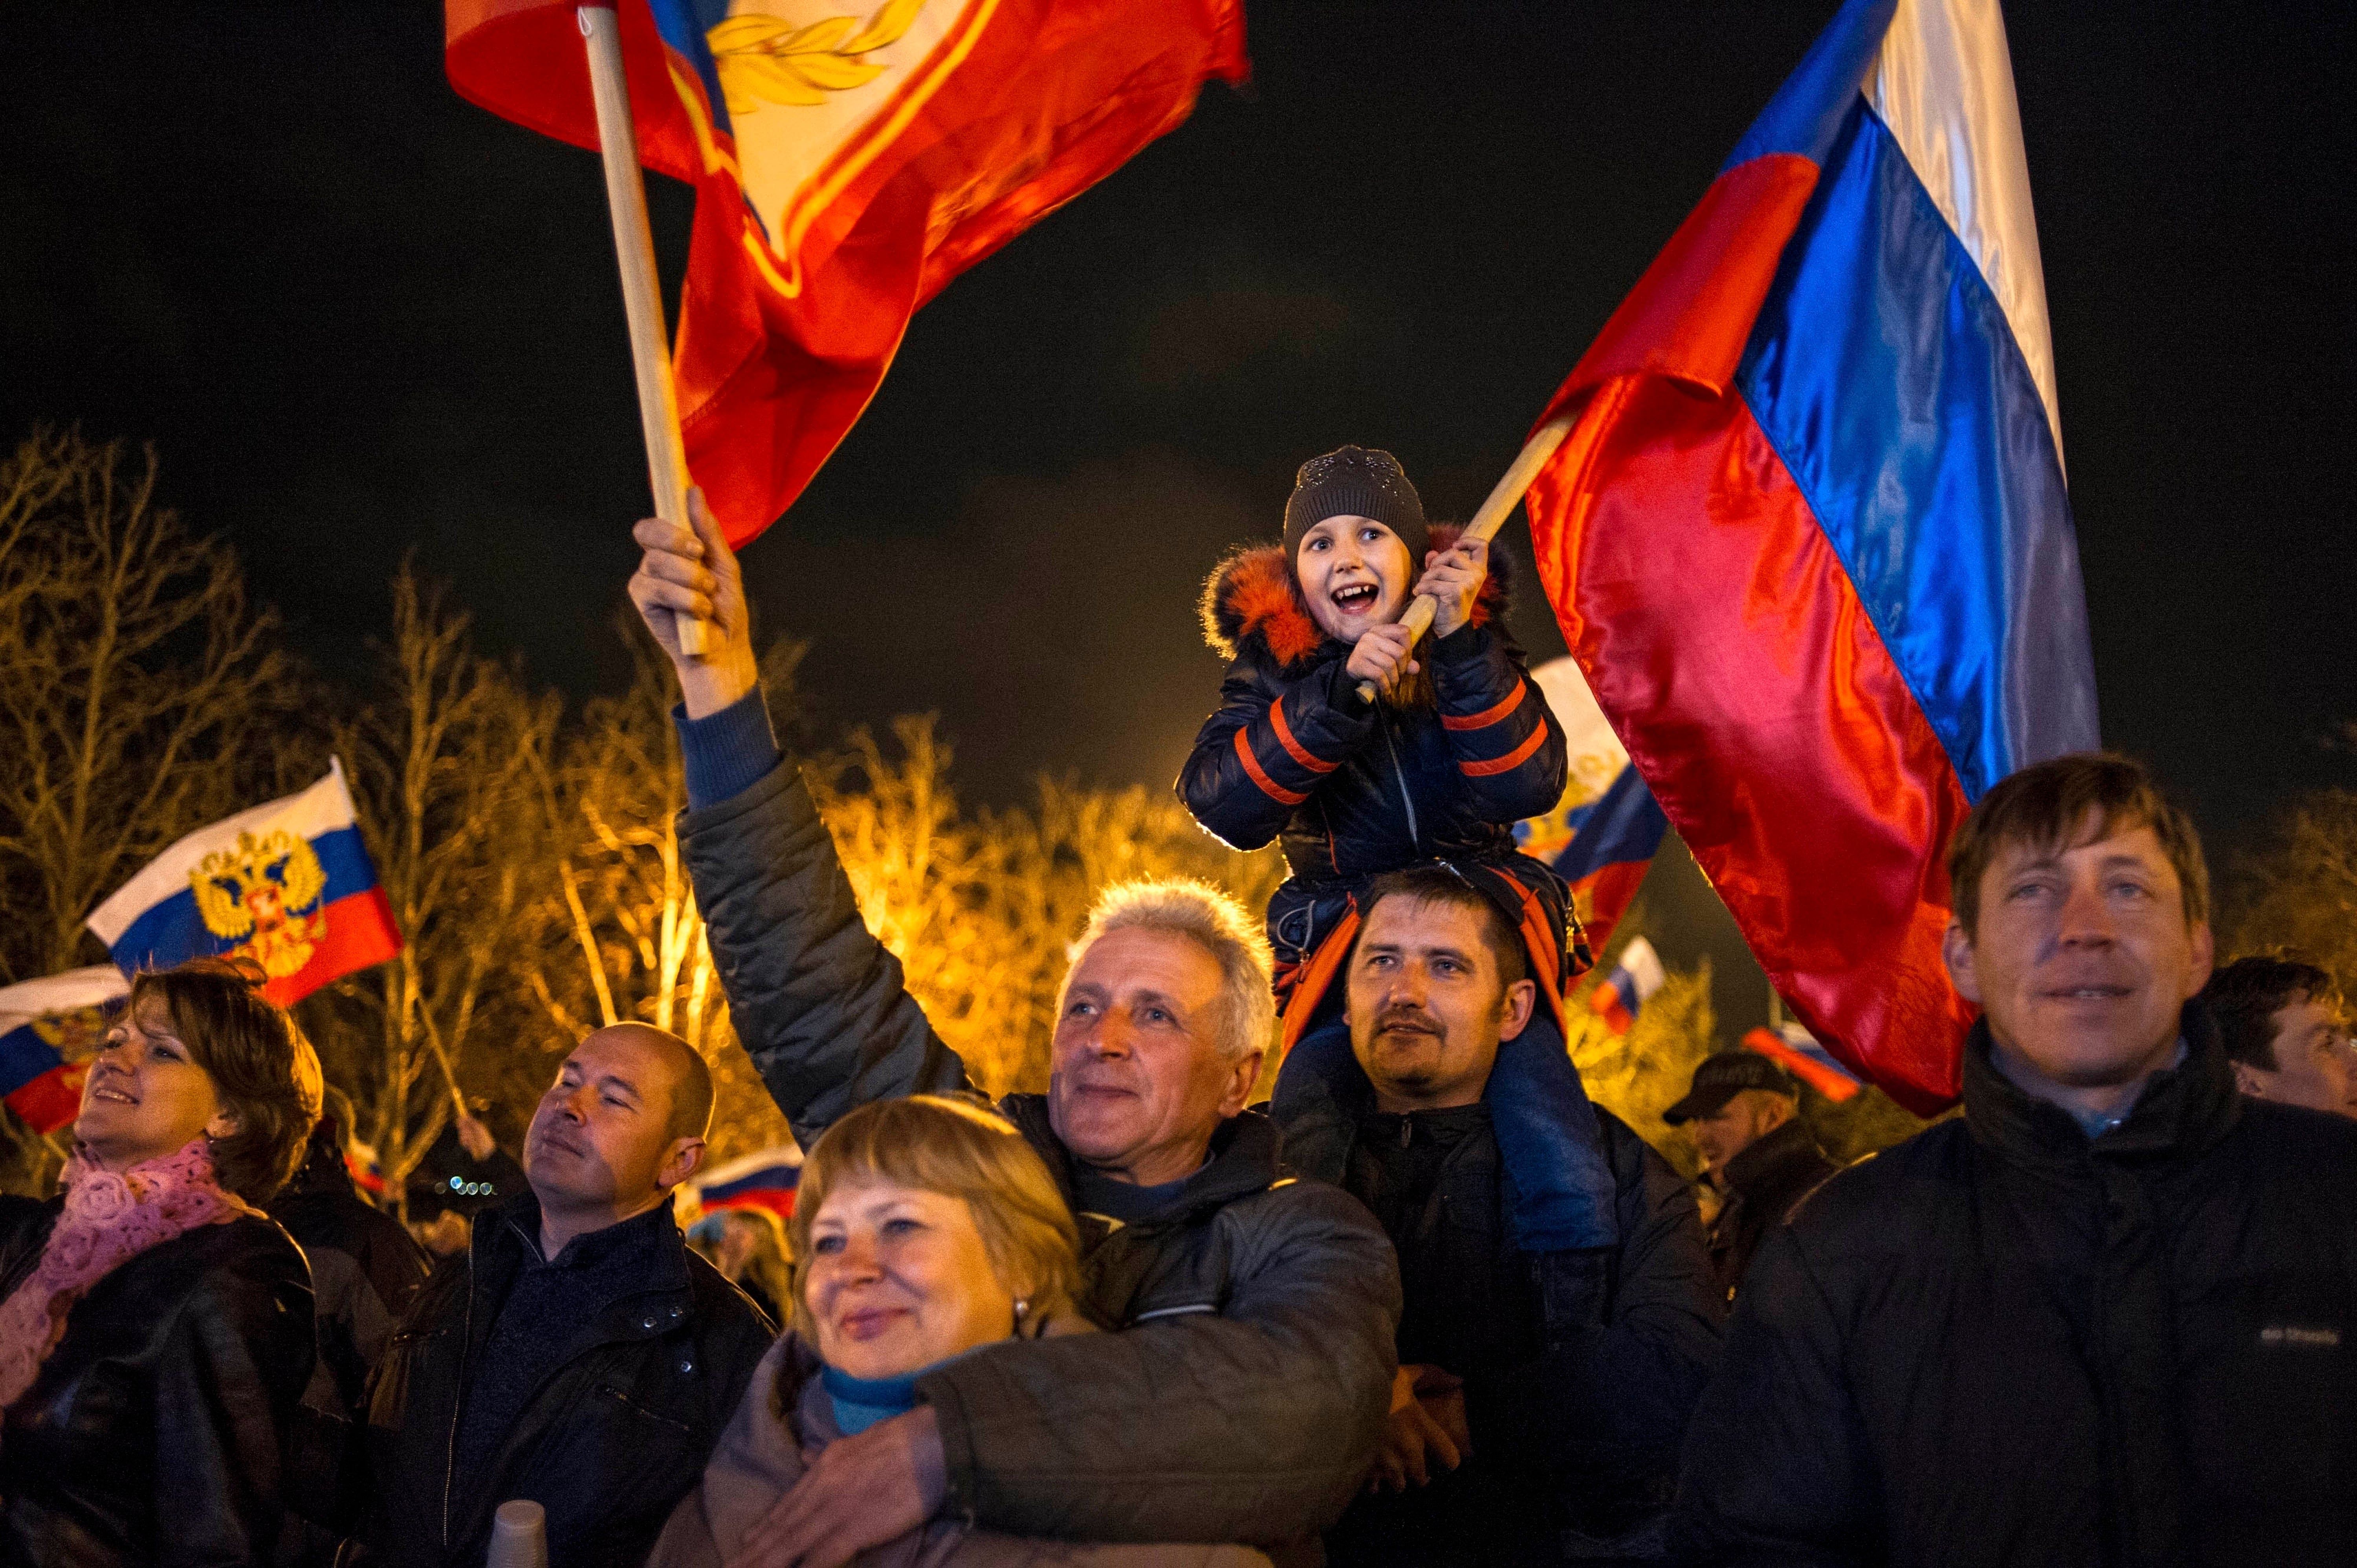 Pro-Russian crowds celebrate in the central square in Sevastopol, Ukraine, on Monday, March 17, 2014. Russian flags fluttered above jubilant crowds after residents of Crimea voted overwhelmingly to secede from Ukraine and join Russia